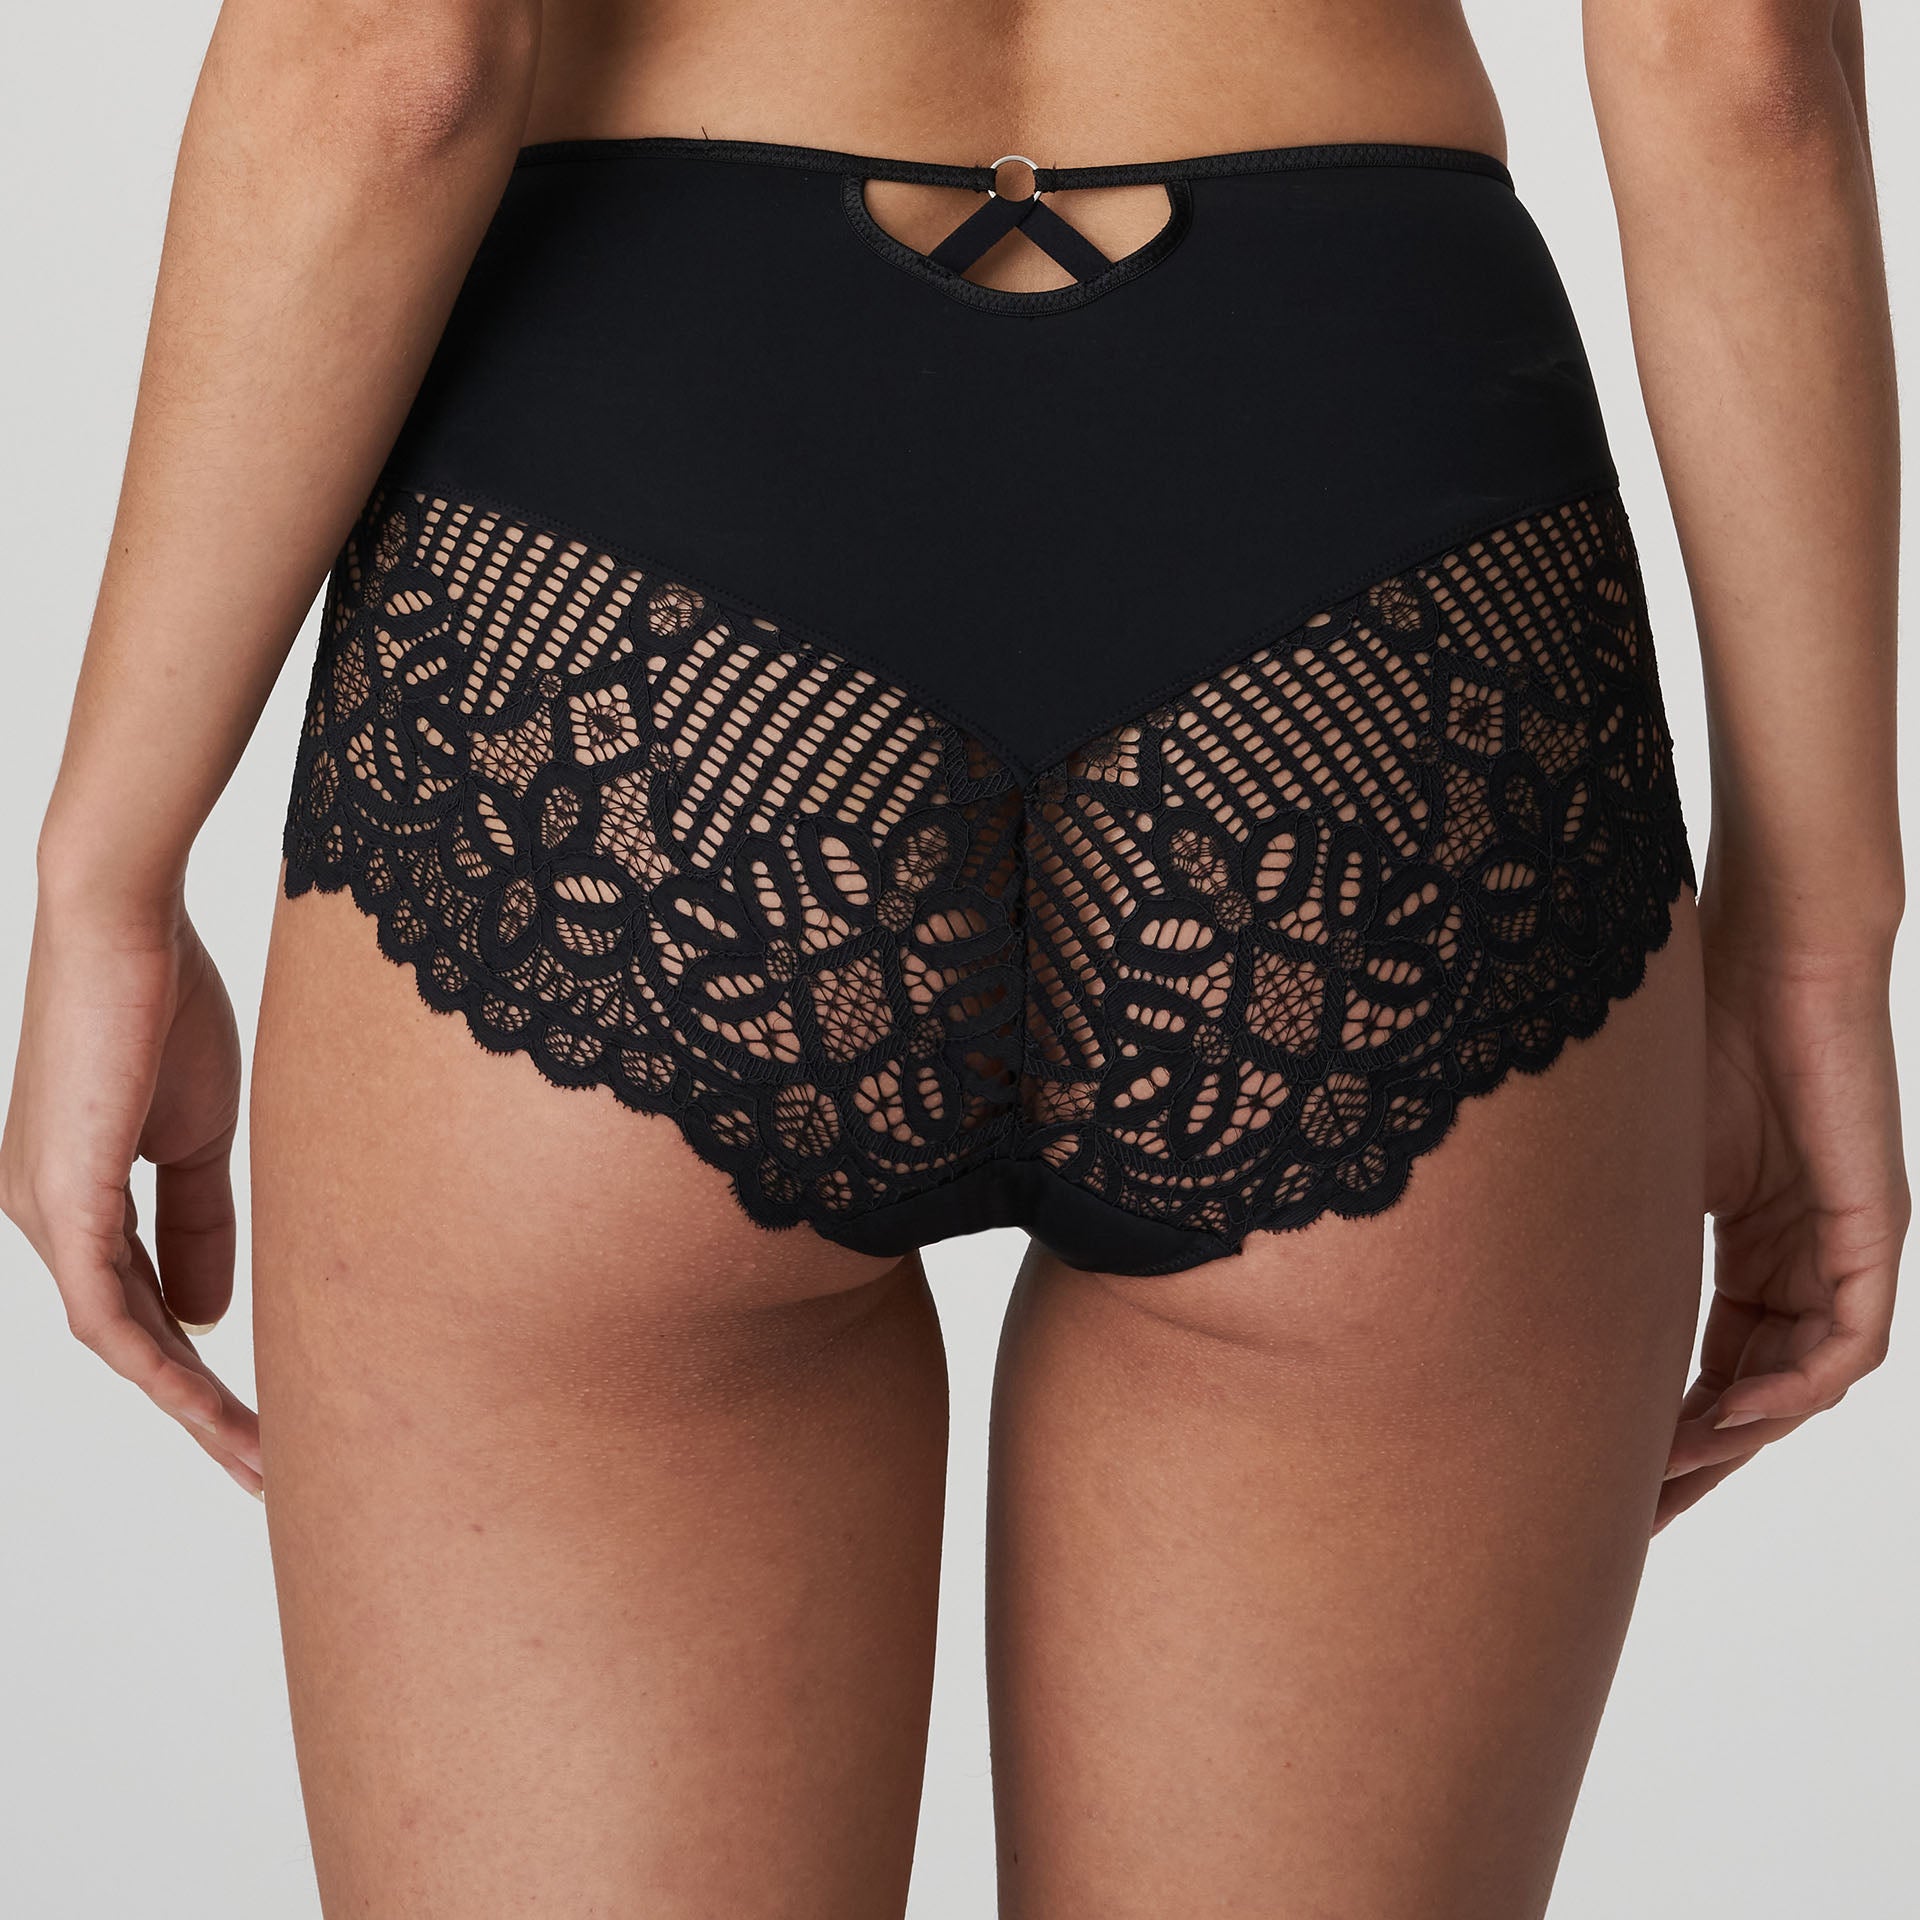 Prima Donna First Night Full Briefs - Briefs  Available at Illusions Lingerie